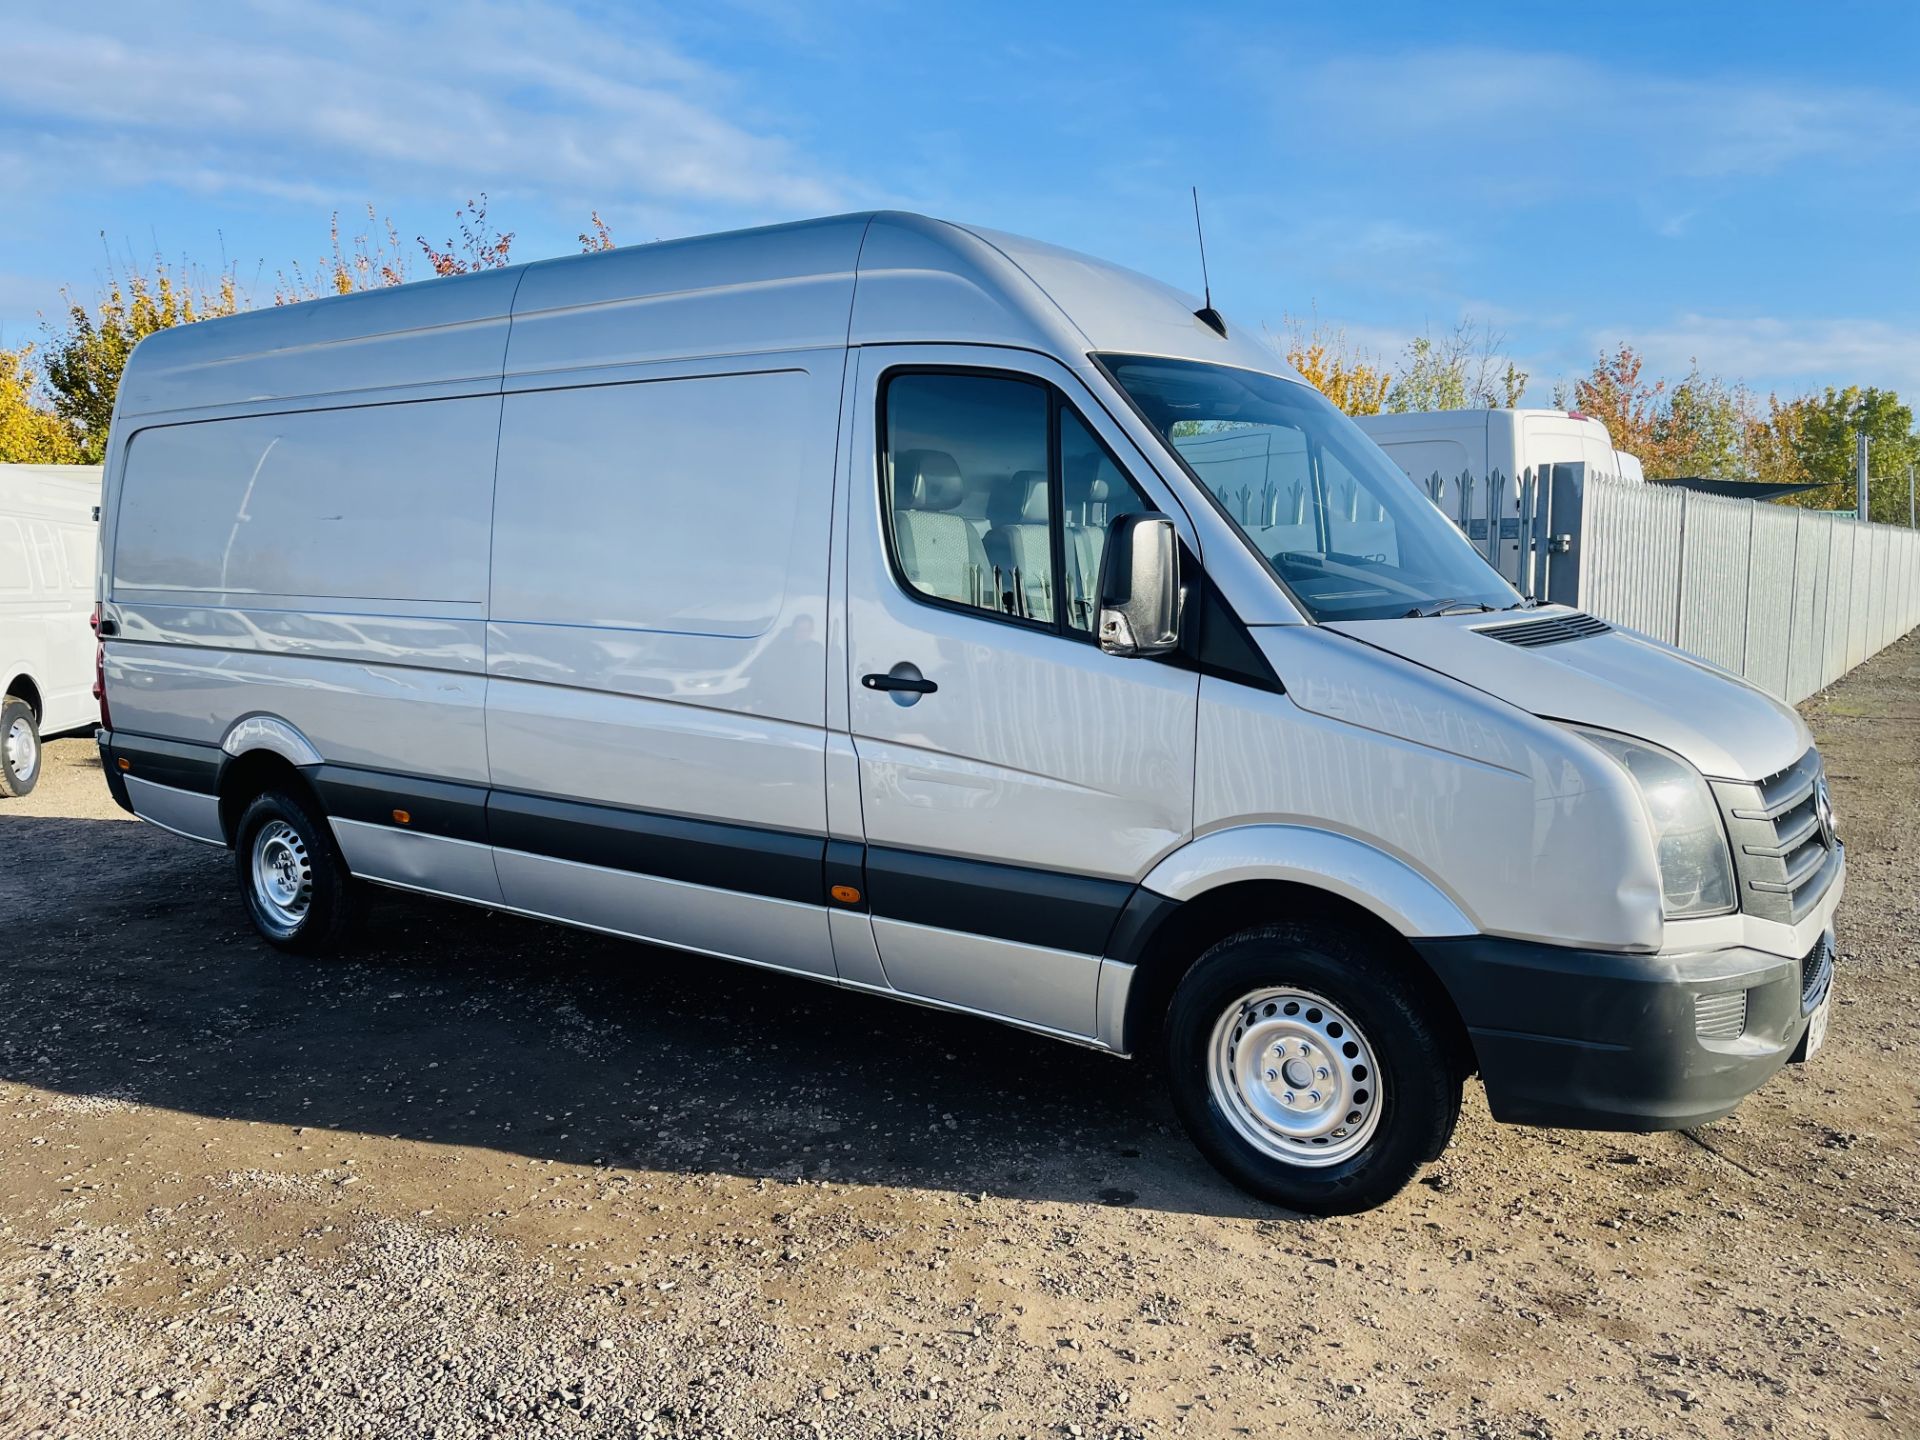 Volkswagen Crafter CR35 2.0 TDI 109 Bluemotion L3 H2 2012 '62 Reg' Air Con - Cruise Control - No Vat - Image 7 of 19